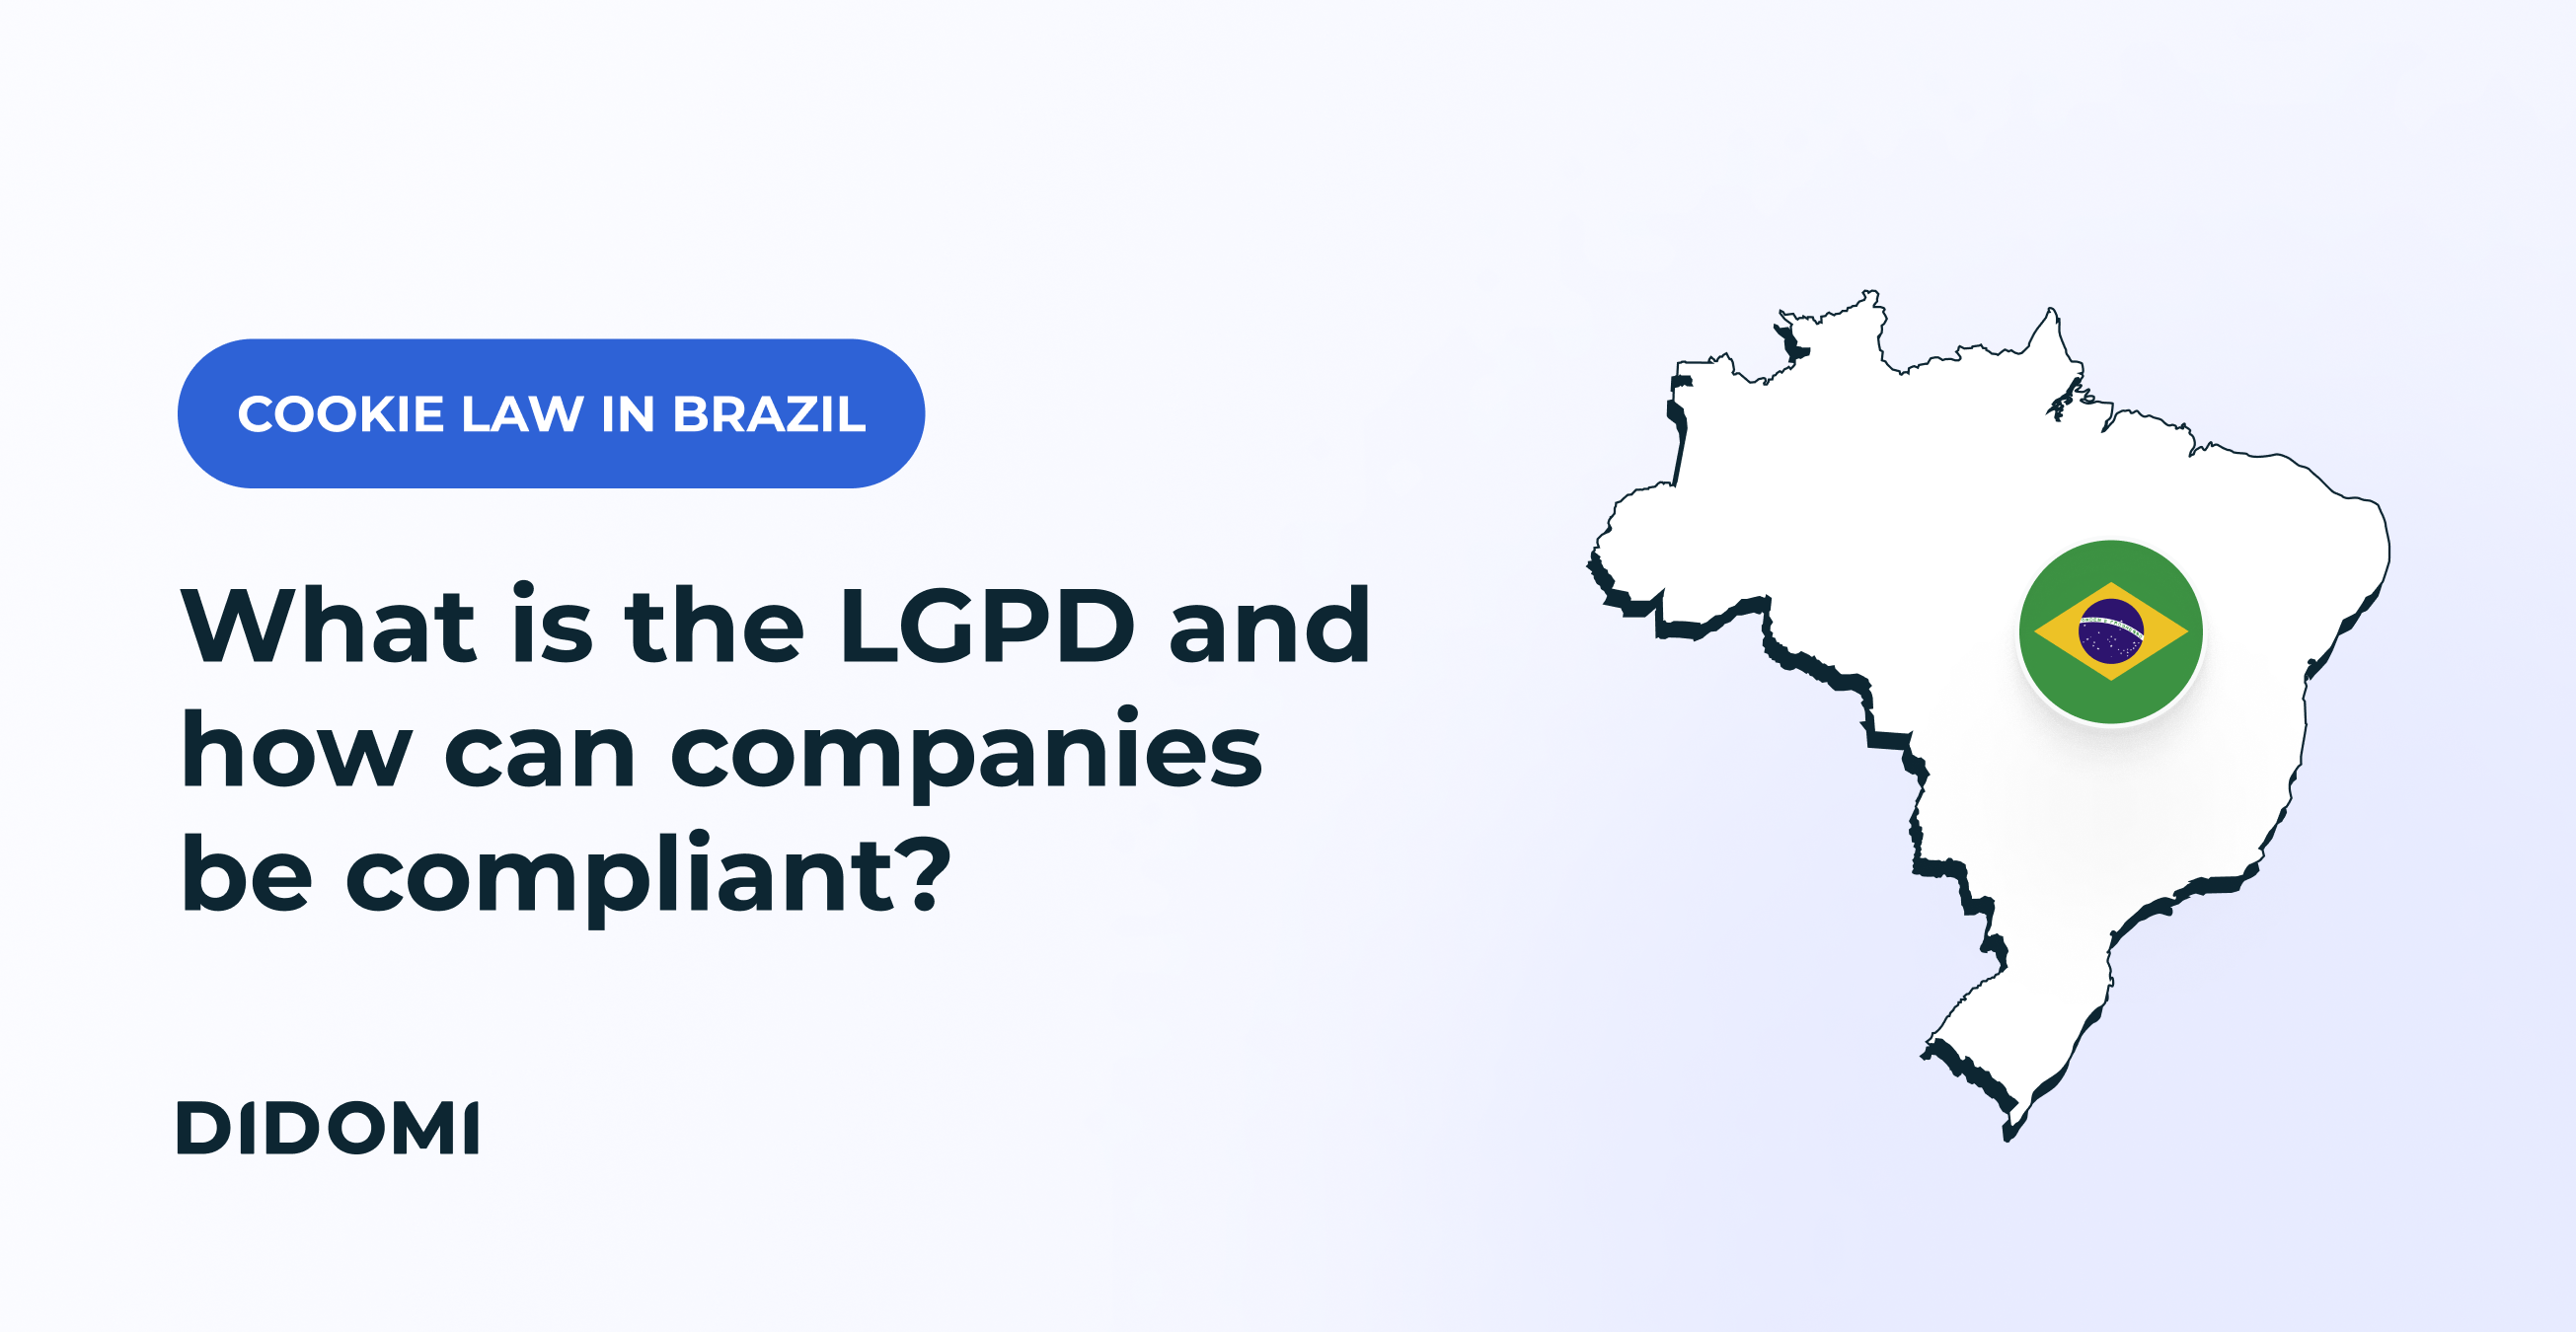 What is the LGPD in Brazil and how can companies be compliant?